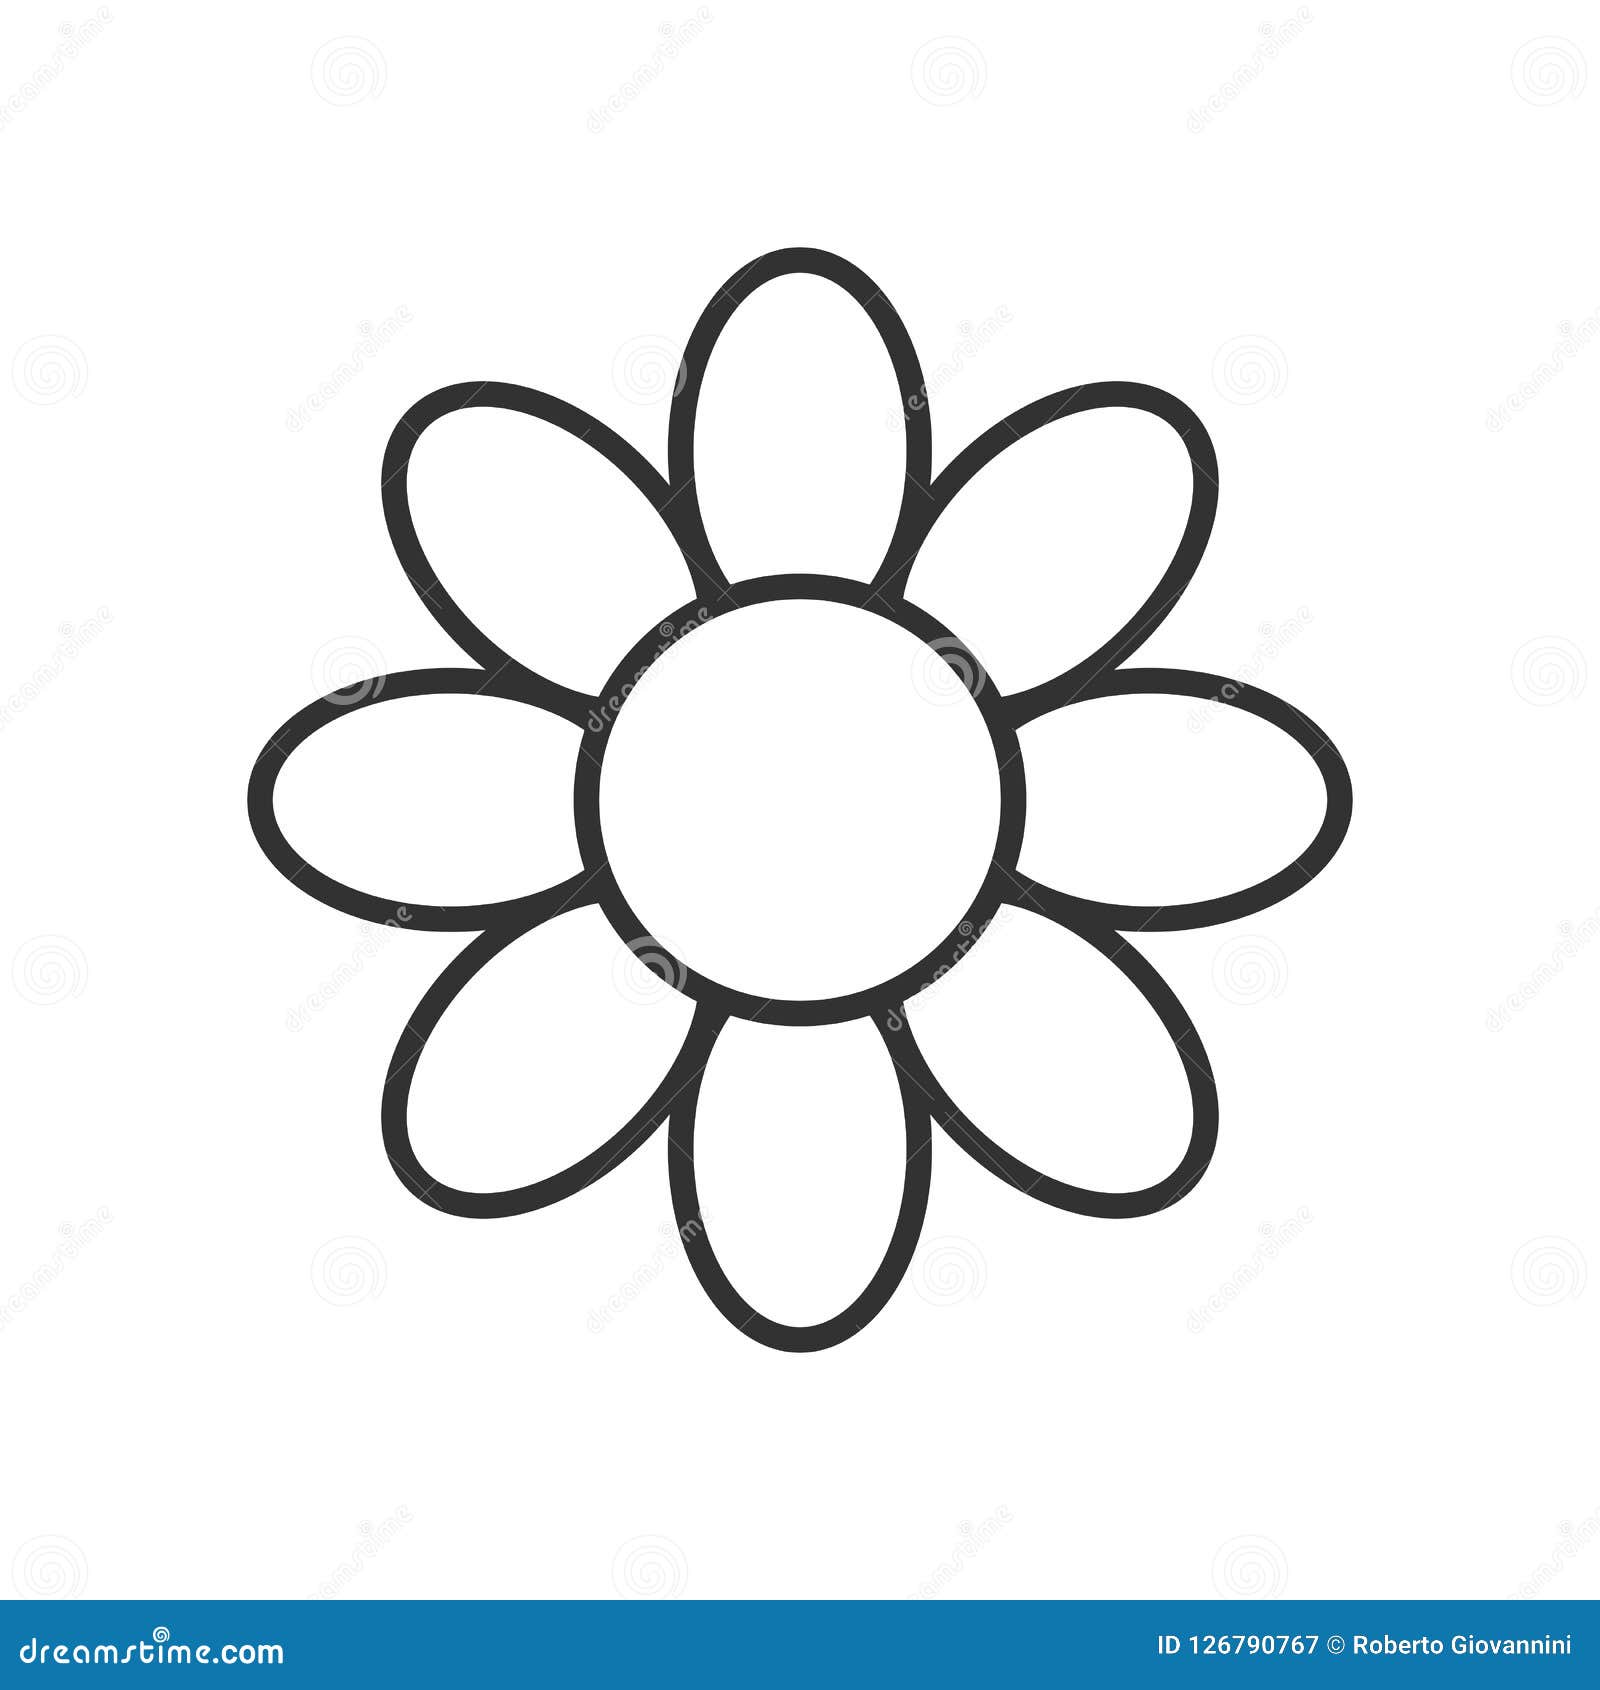 daisy flower outline icon on white